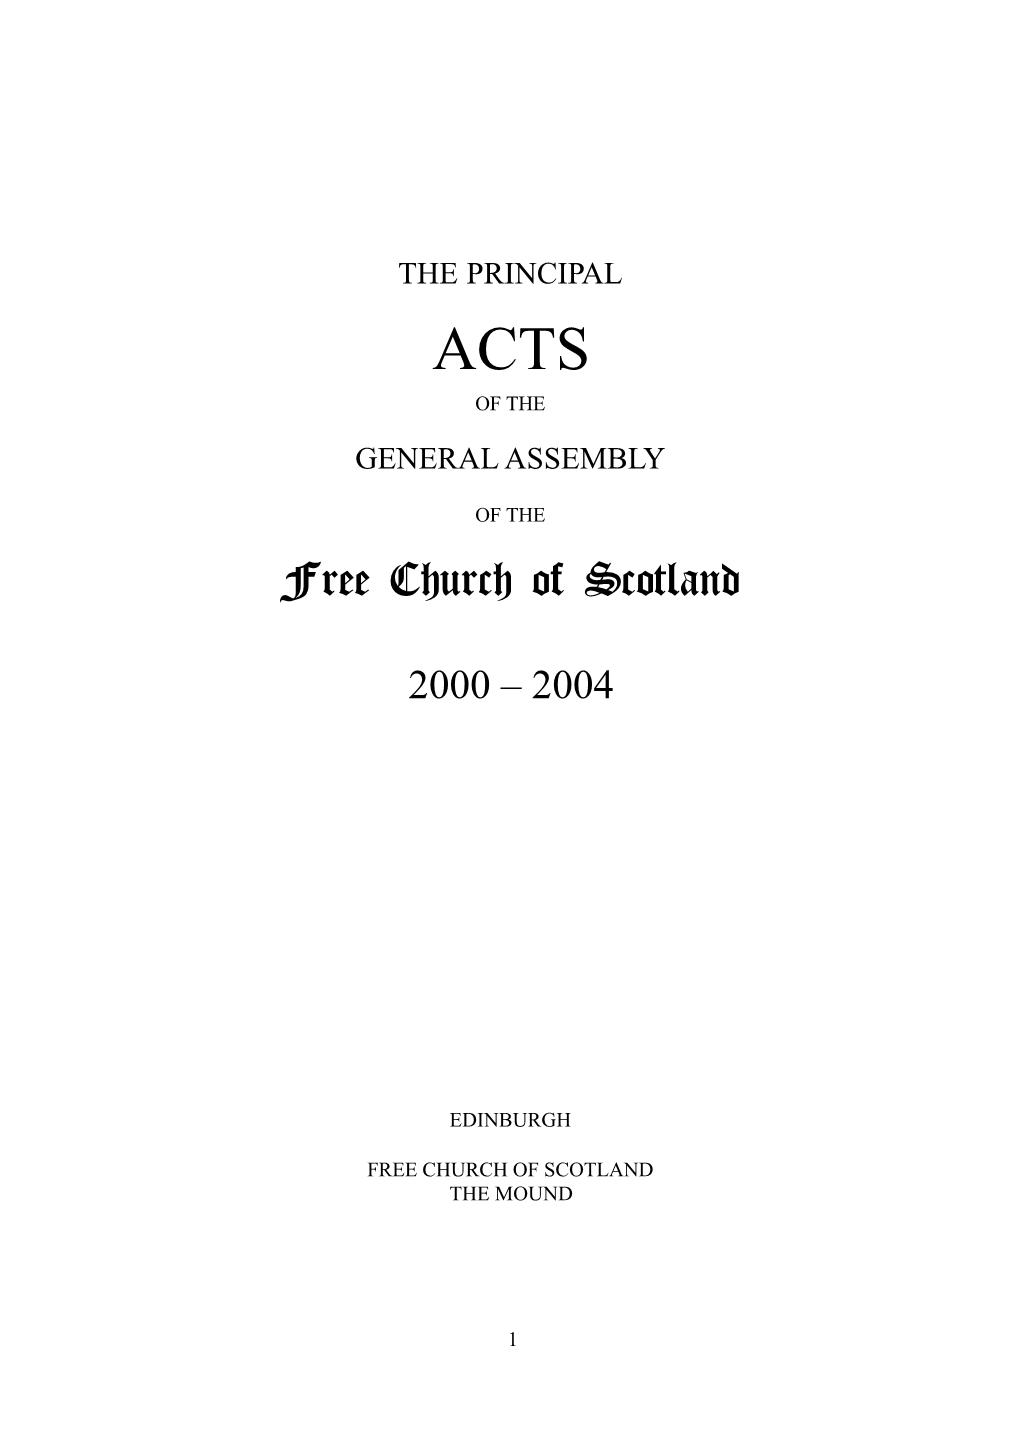 Acts 2000-2004